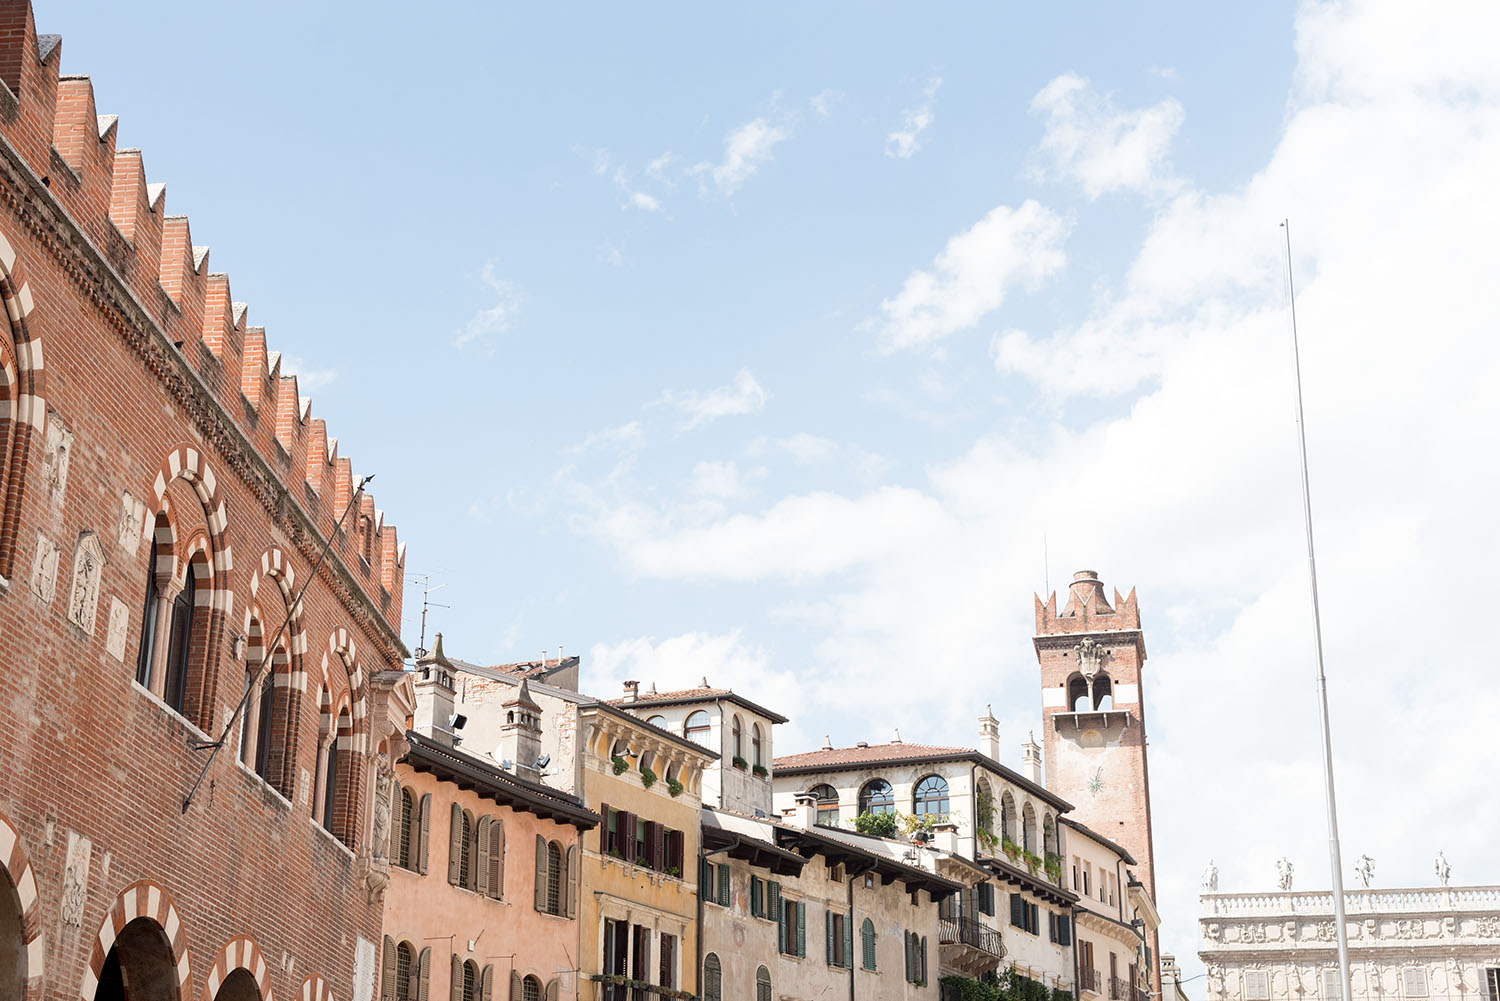 Medieval buildings in Verona's main square, as photographed by top Winnipeg travel blogger Cee Fardoe of Coco & Vera